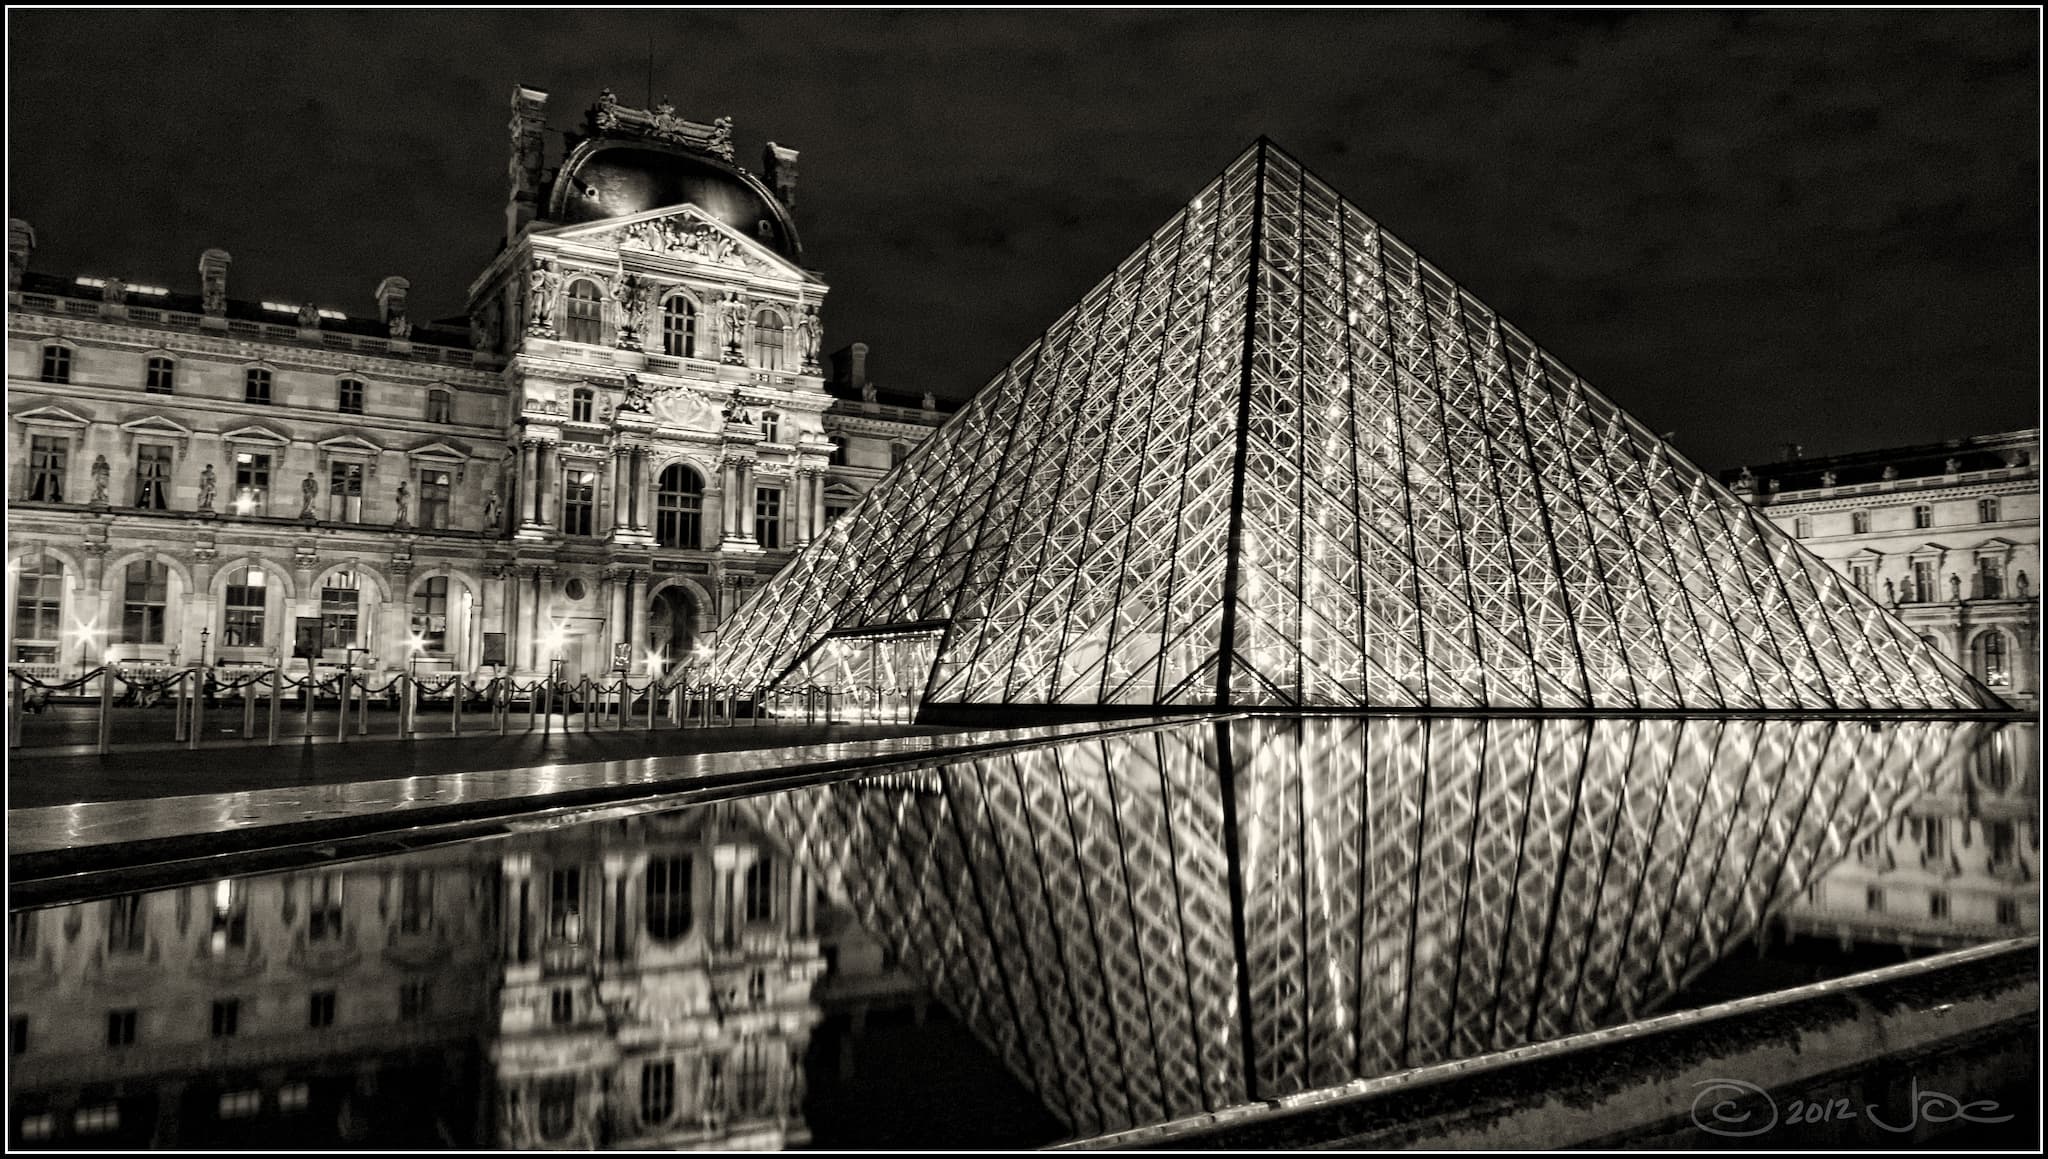 The Louvre Museum with its Glass Pyramid